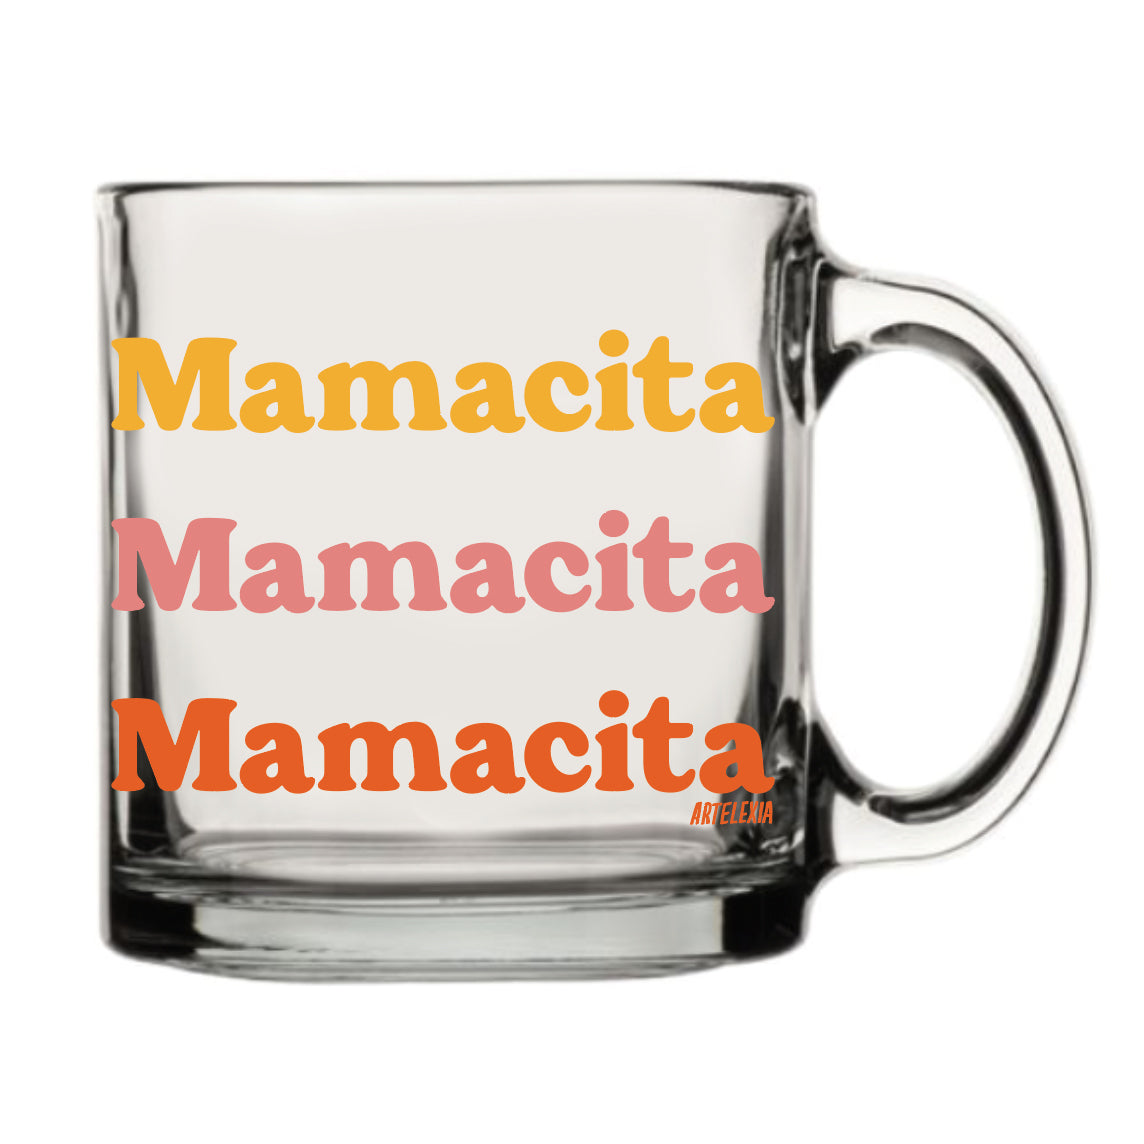 clear glass mug featuring the word Mamacita repeated 3 times in shades of yellow, pink & orange